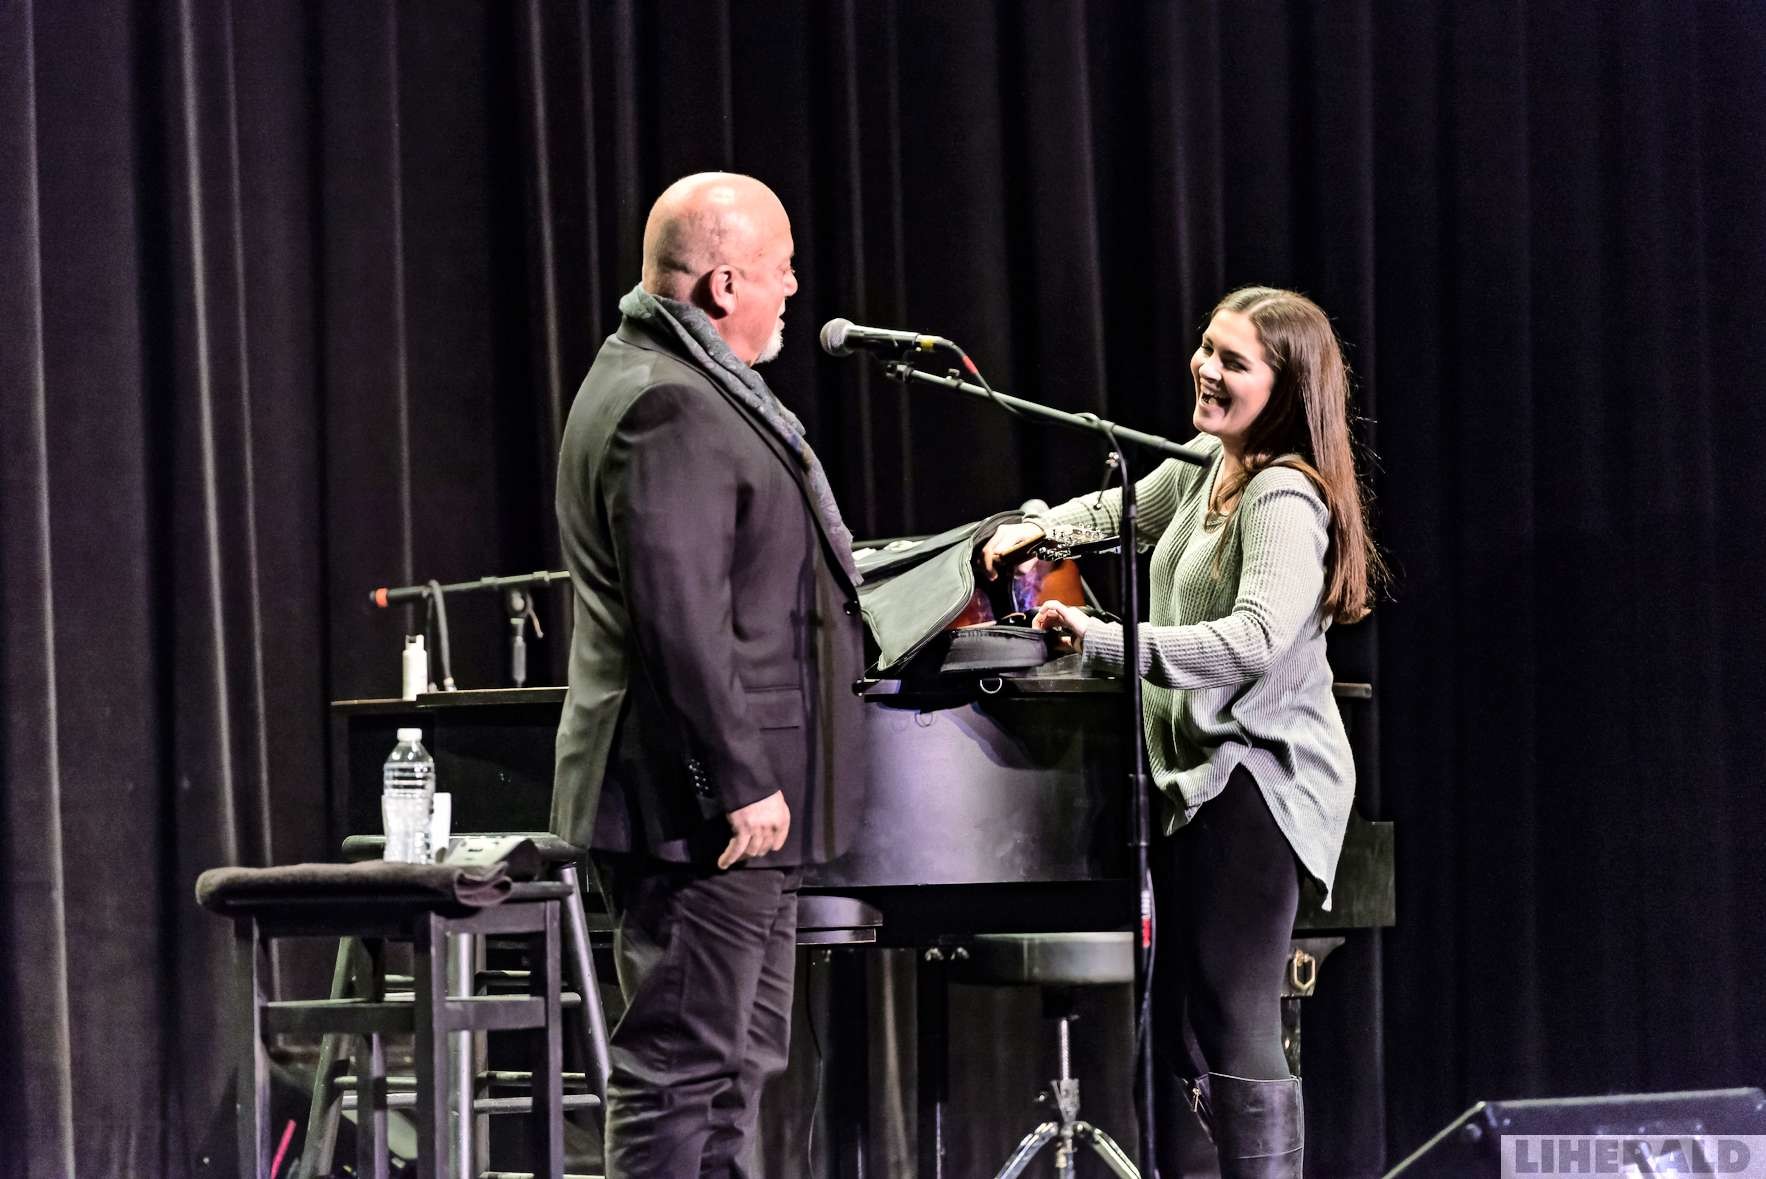 Jillian Rossi, a LIHSA 11th grader who attends JFK High School, played guitar while she sang an original song during Billy Joel’s meeting with students at the Tilles Center for the Performing Arts yesterday.